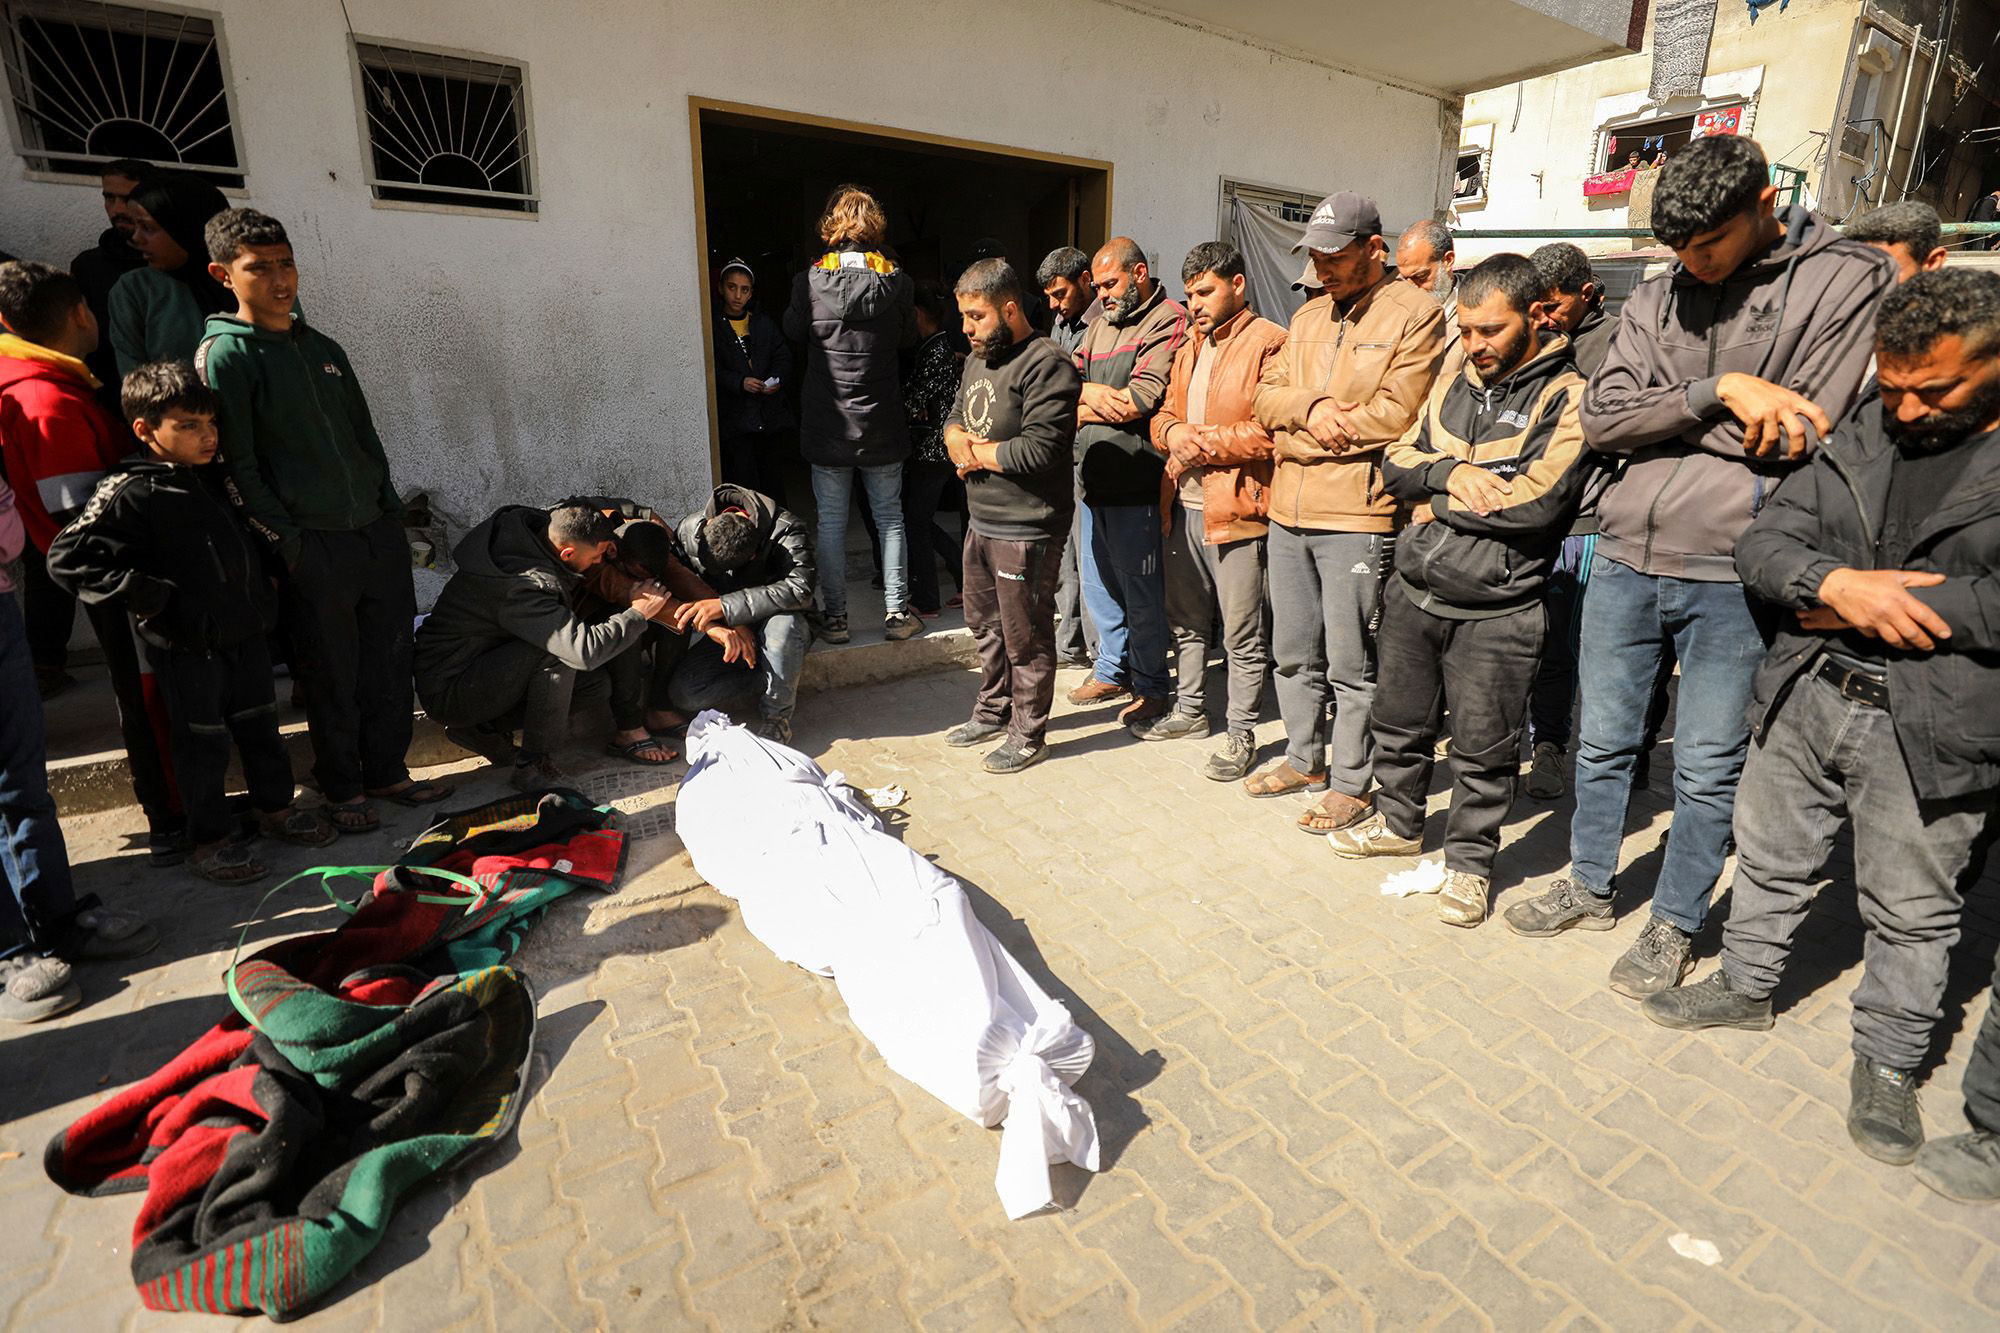 Palestinians mourn near a body at Kamal Edwan Hospital in Beit Lahia, northern Gaza, on February 29, after Israeli soldiers opened fire while people awaited food and aid. 